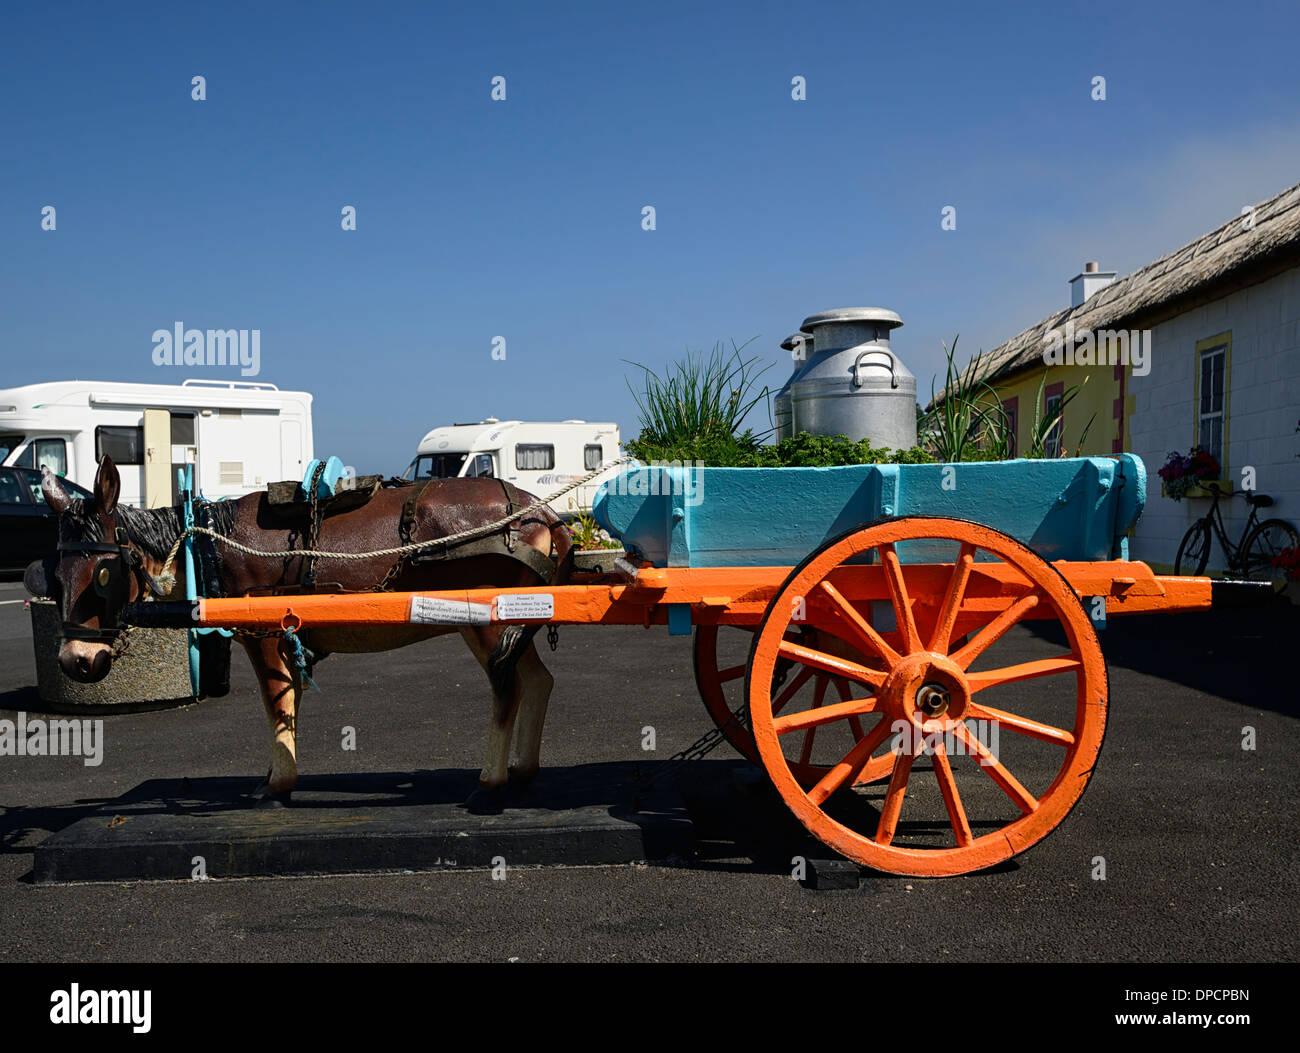 fake artificial model donkey cart milk pail ardmore village waterford ireland summer tidy neat town Stock Photo